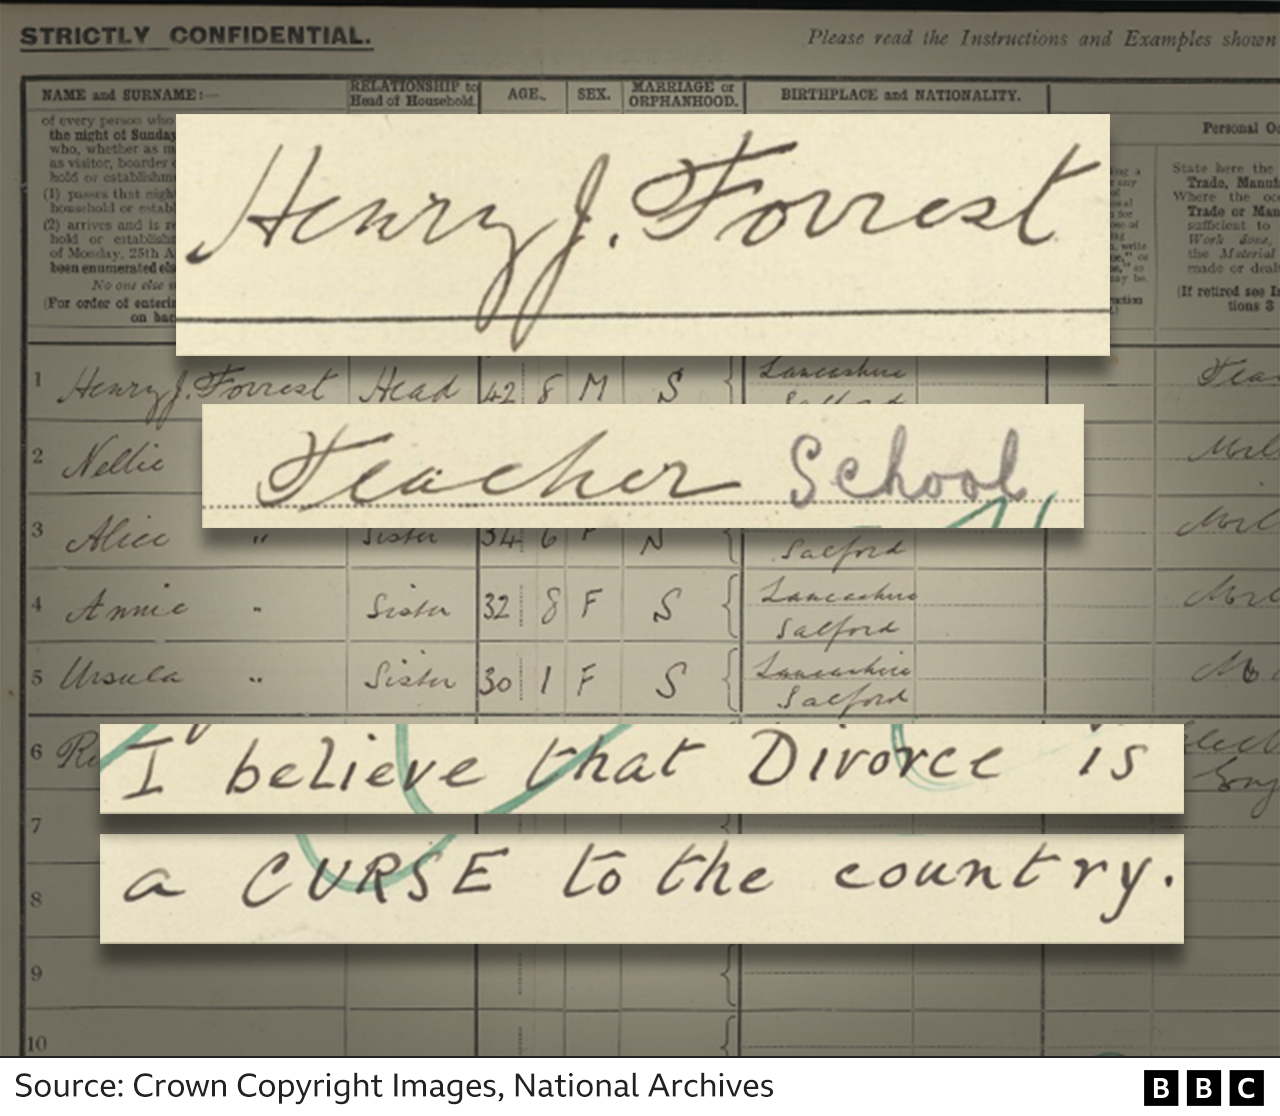 Extracts from Henry Forrest's 1921 Census form